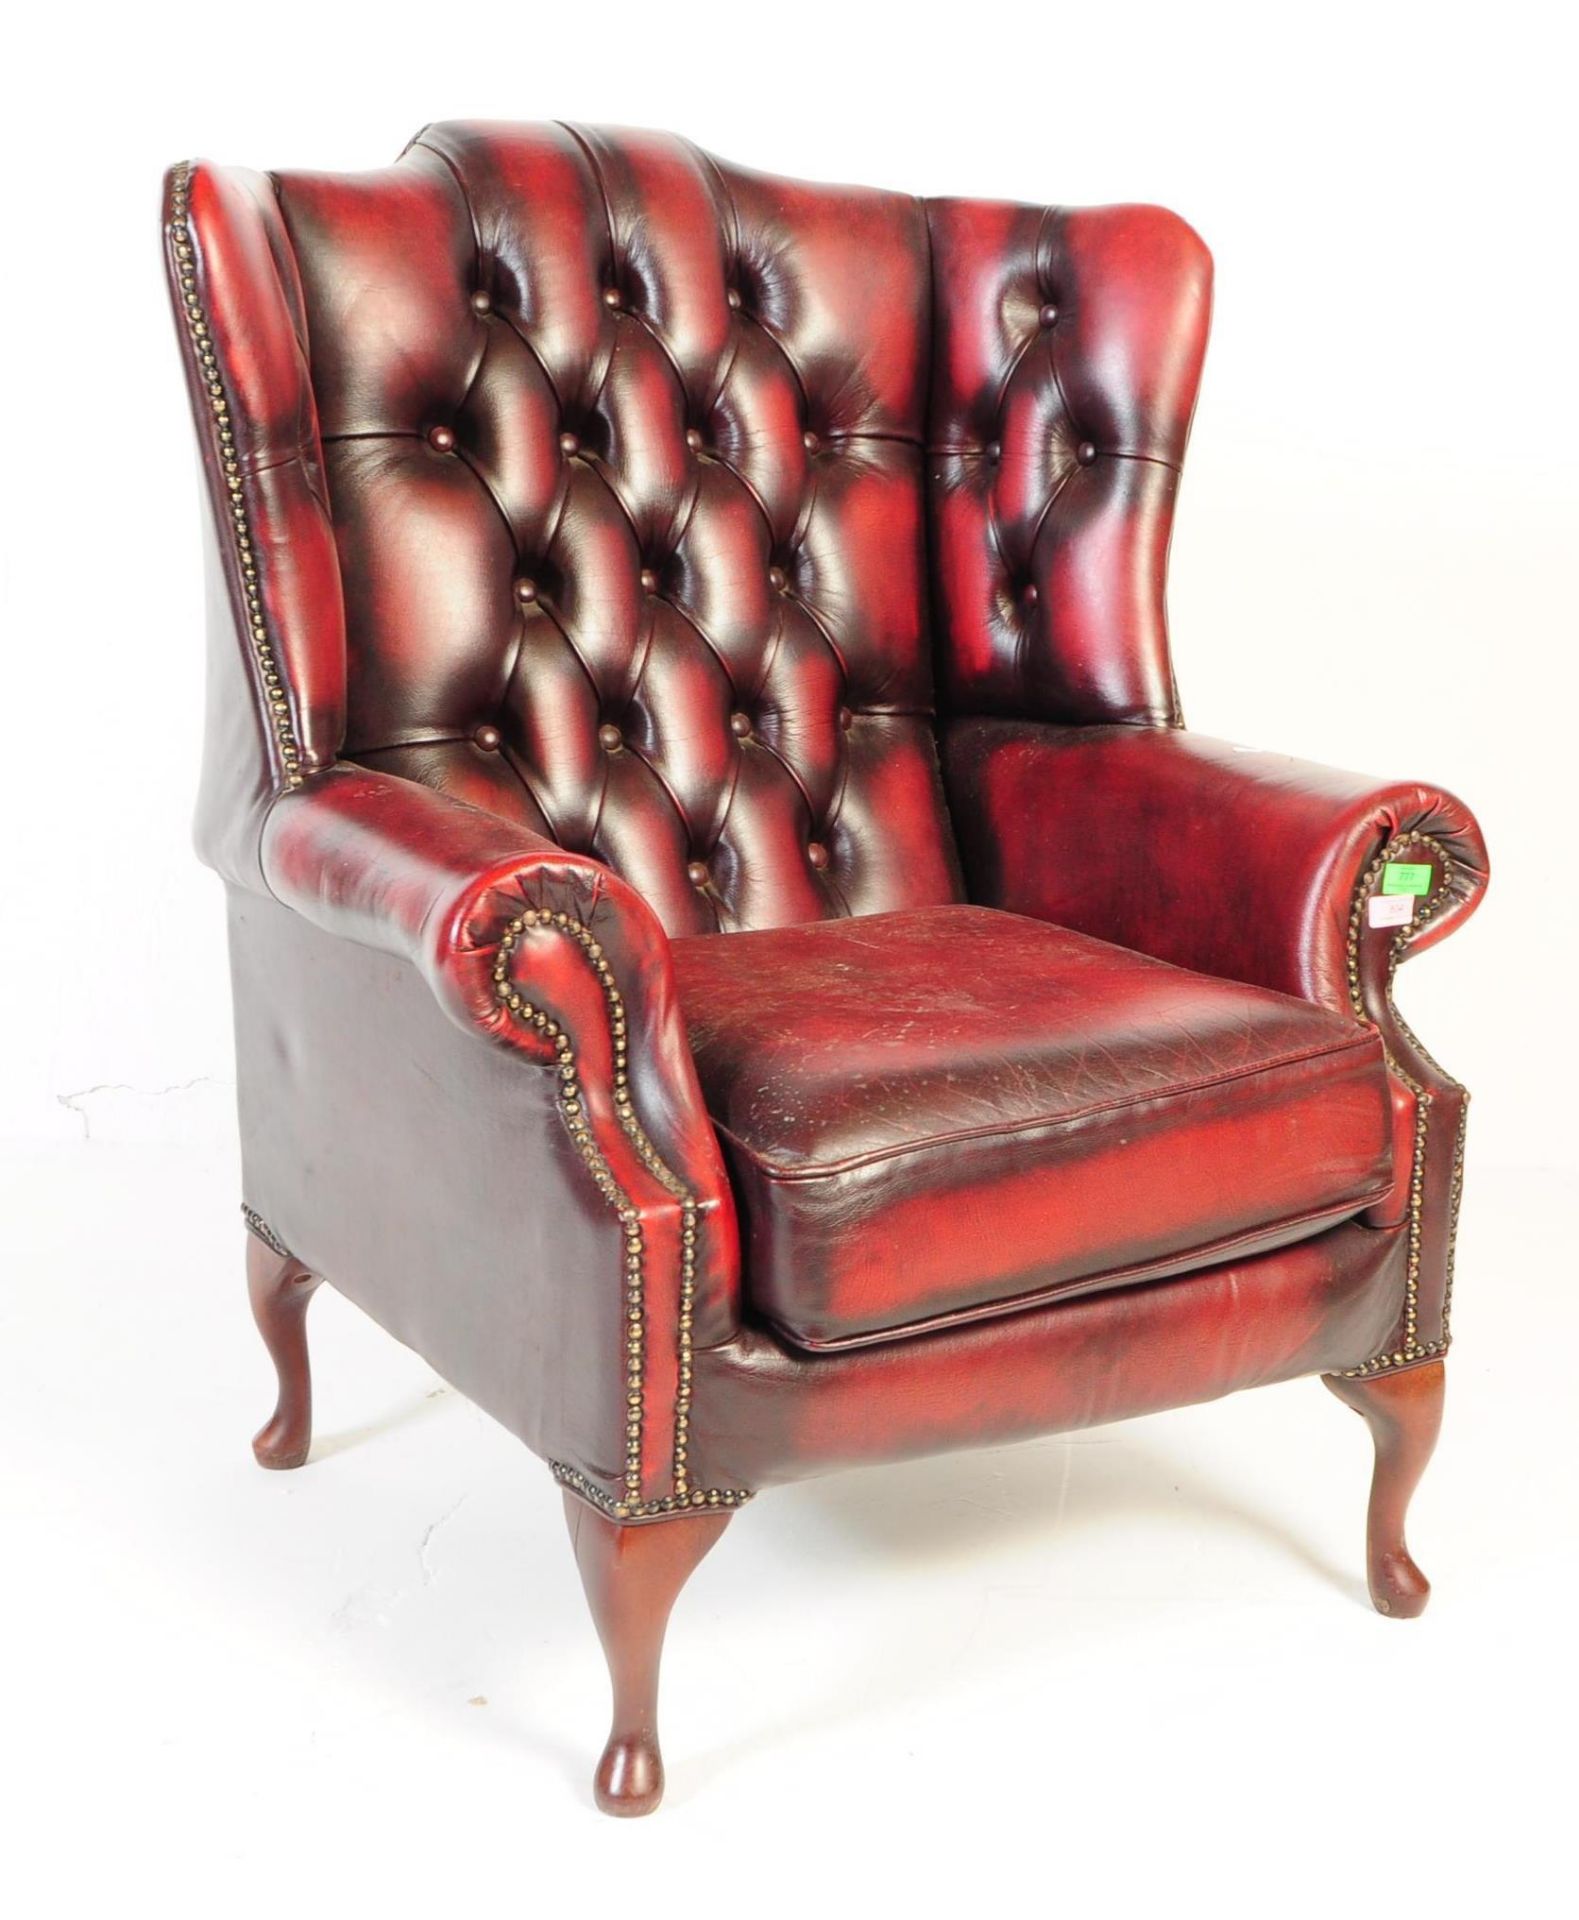 QUEEN ANNE WING BACK CHESTERFIELD BUTTON BACK ARMCHAIR